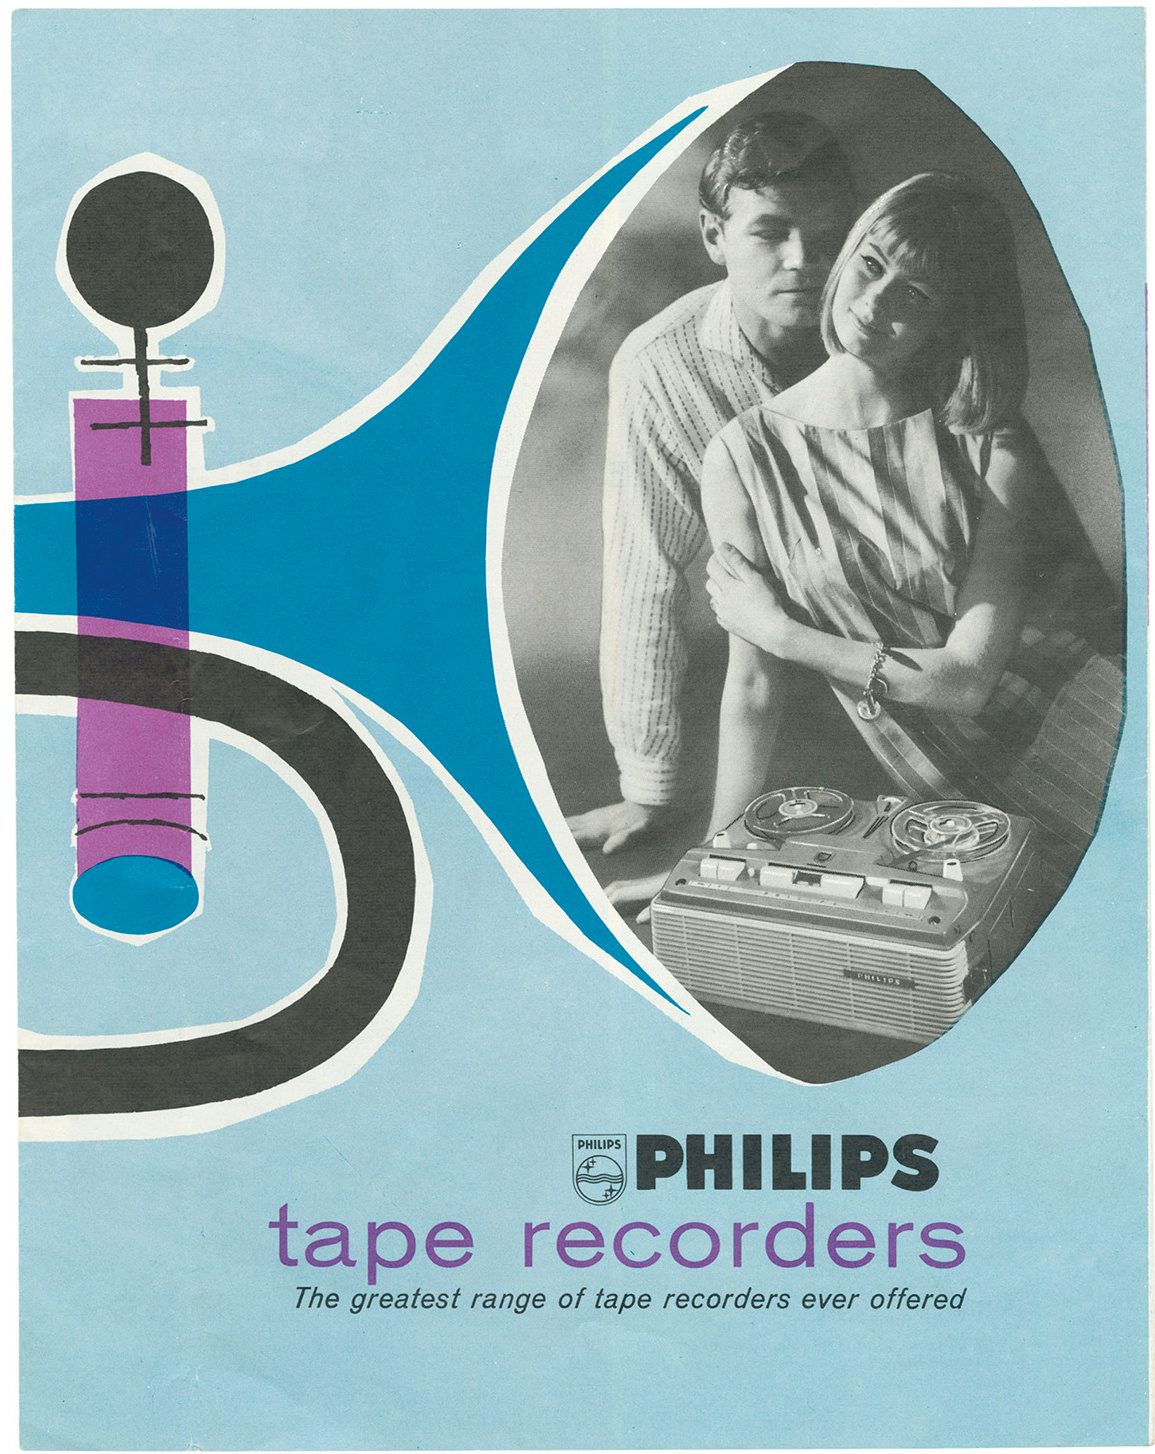 Blue poster for Philips tape records showing a black and white photo of a couple standing over a tape recorder, which is encased in the end of a trumpet illustration